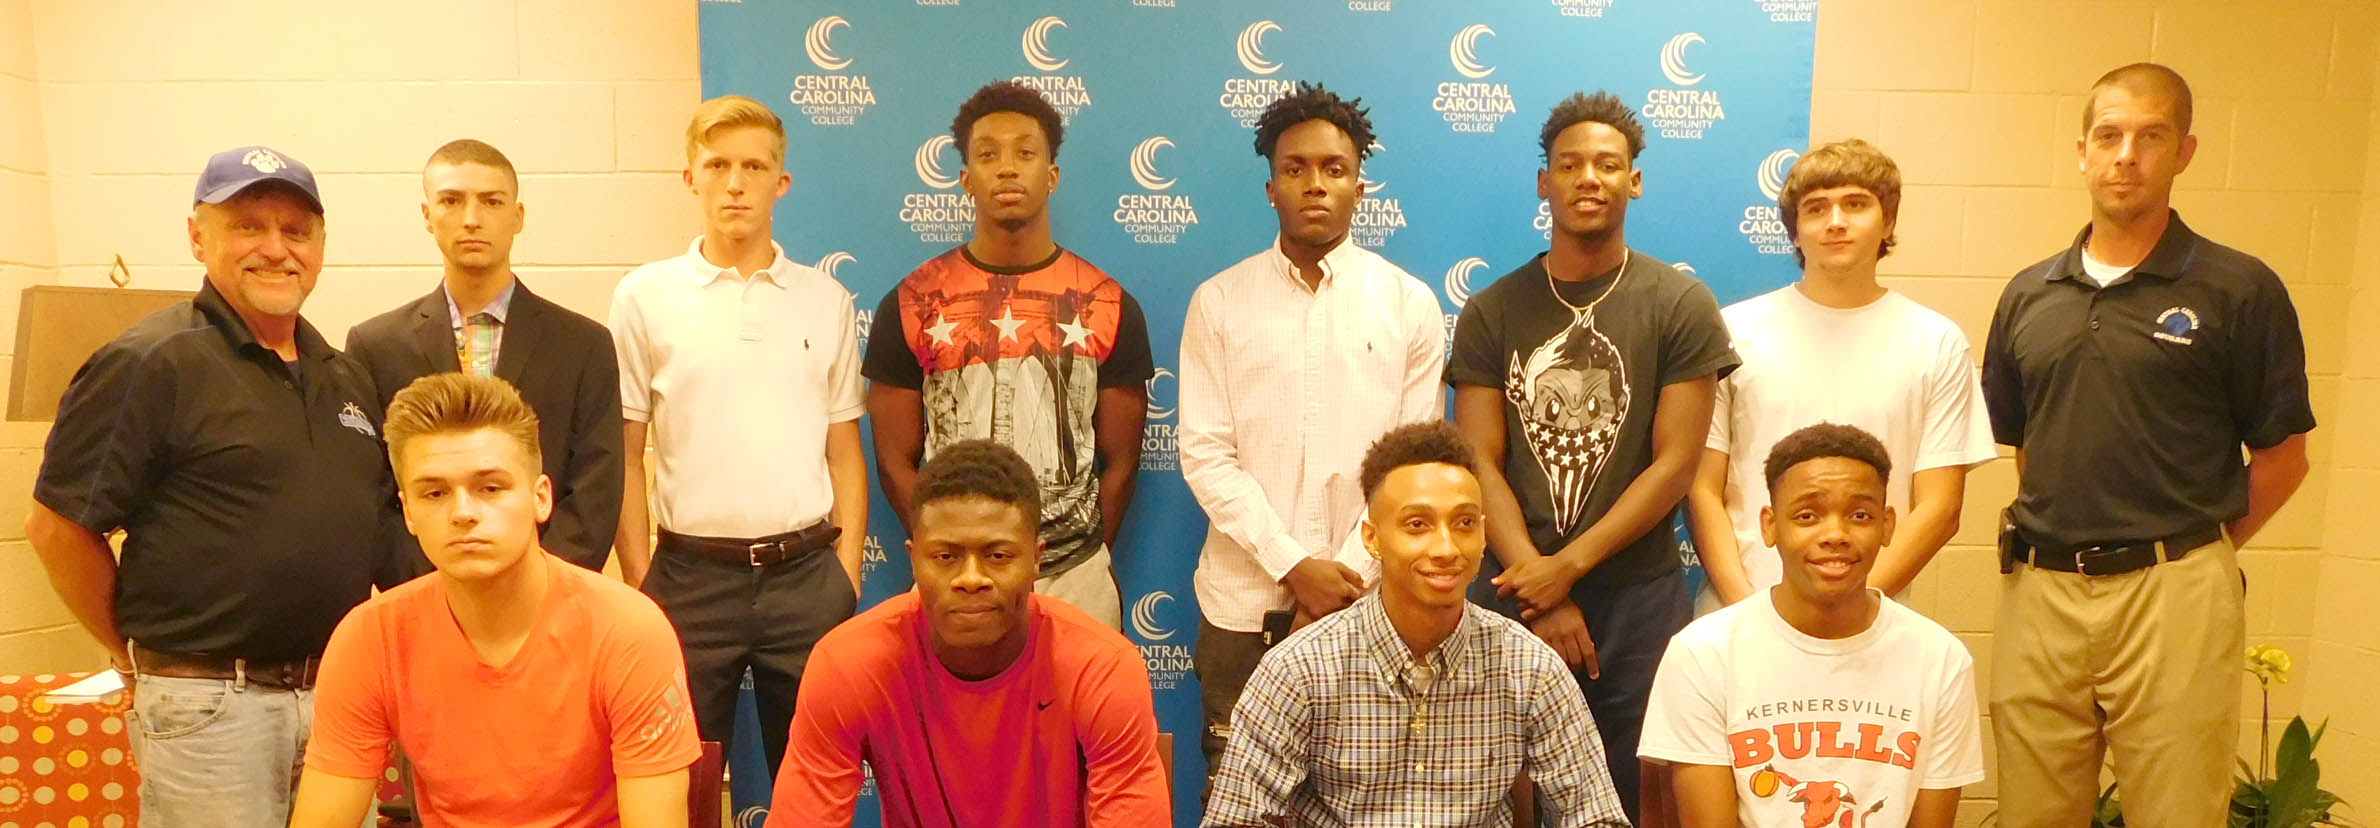 Click to enlarge,  Eleven student-athletes have signed to join the Central Carolina Community College men's basketball program for the 2017-2018 season. Pictured are, left to right: front row, Caleb Thomas, Jeremiah Tolbert, Michael Brown, and Daniel Matangira; back row, CCCC Head Coach Doug Connor, Tyler Toro, Trey North, Chris George, Toby Brown Jr., Montel Moore, Cameron Wilson, and CCCC Assistant Coach Brad McDougald. Not pictured is Chrishawn Lindsey. 